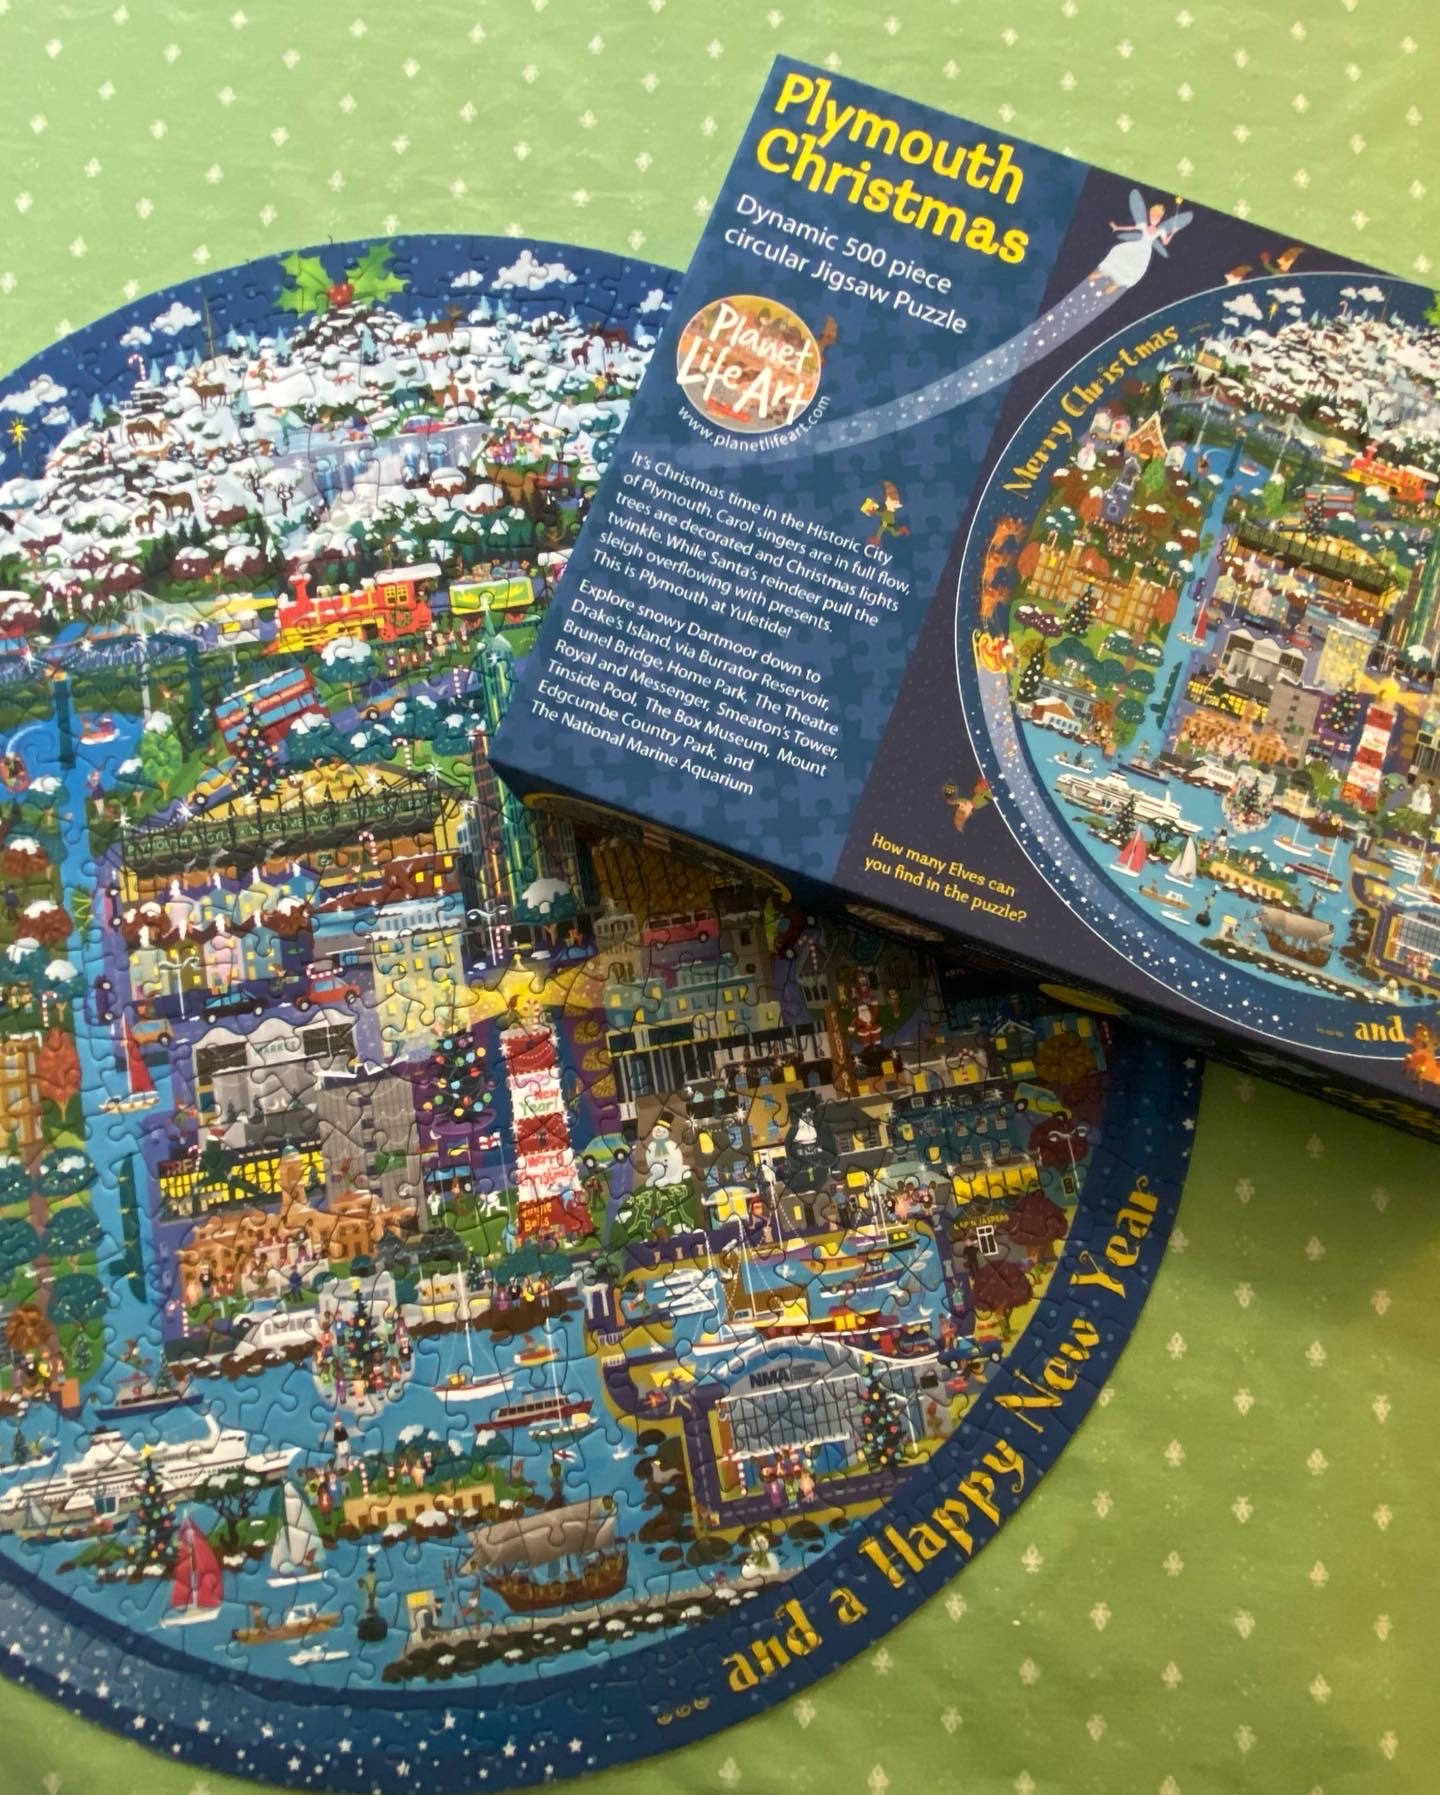 Planet Plymouth Christmas Jigsaw Puzzle